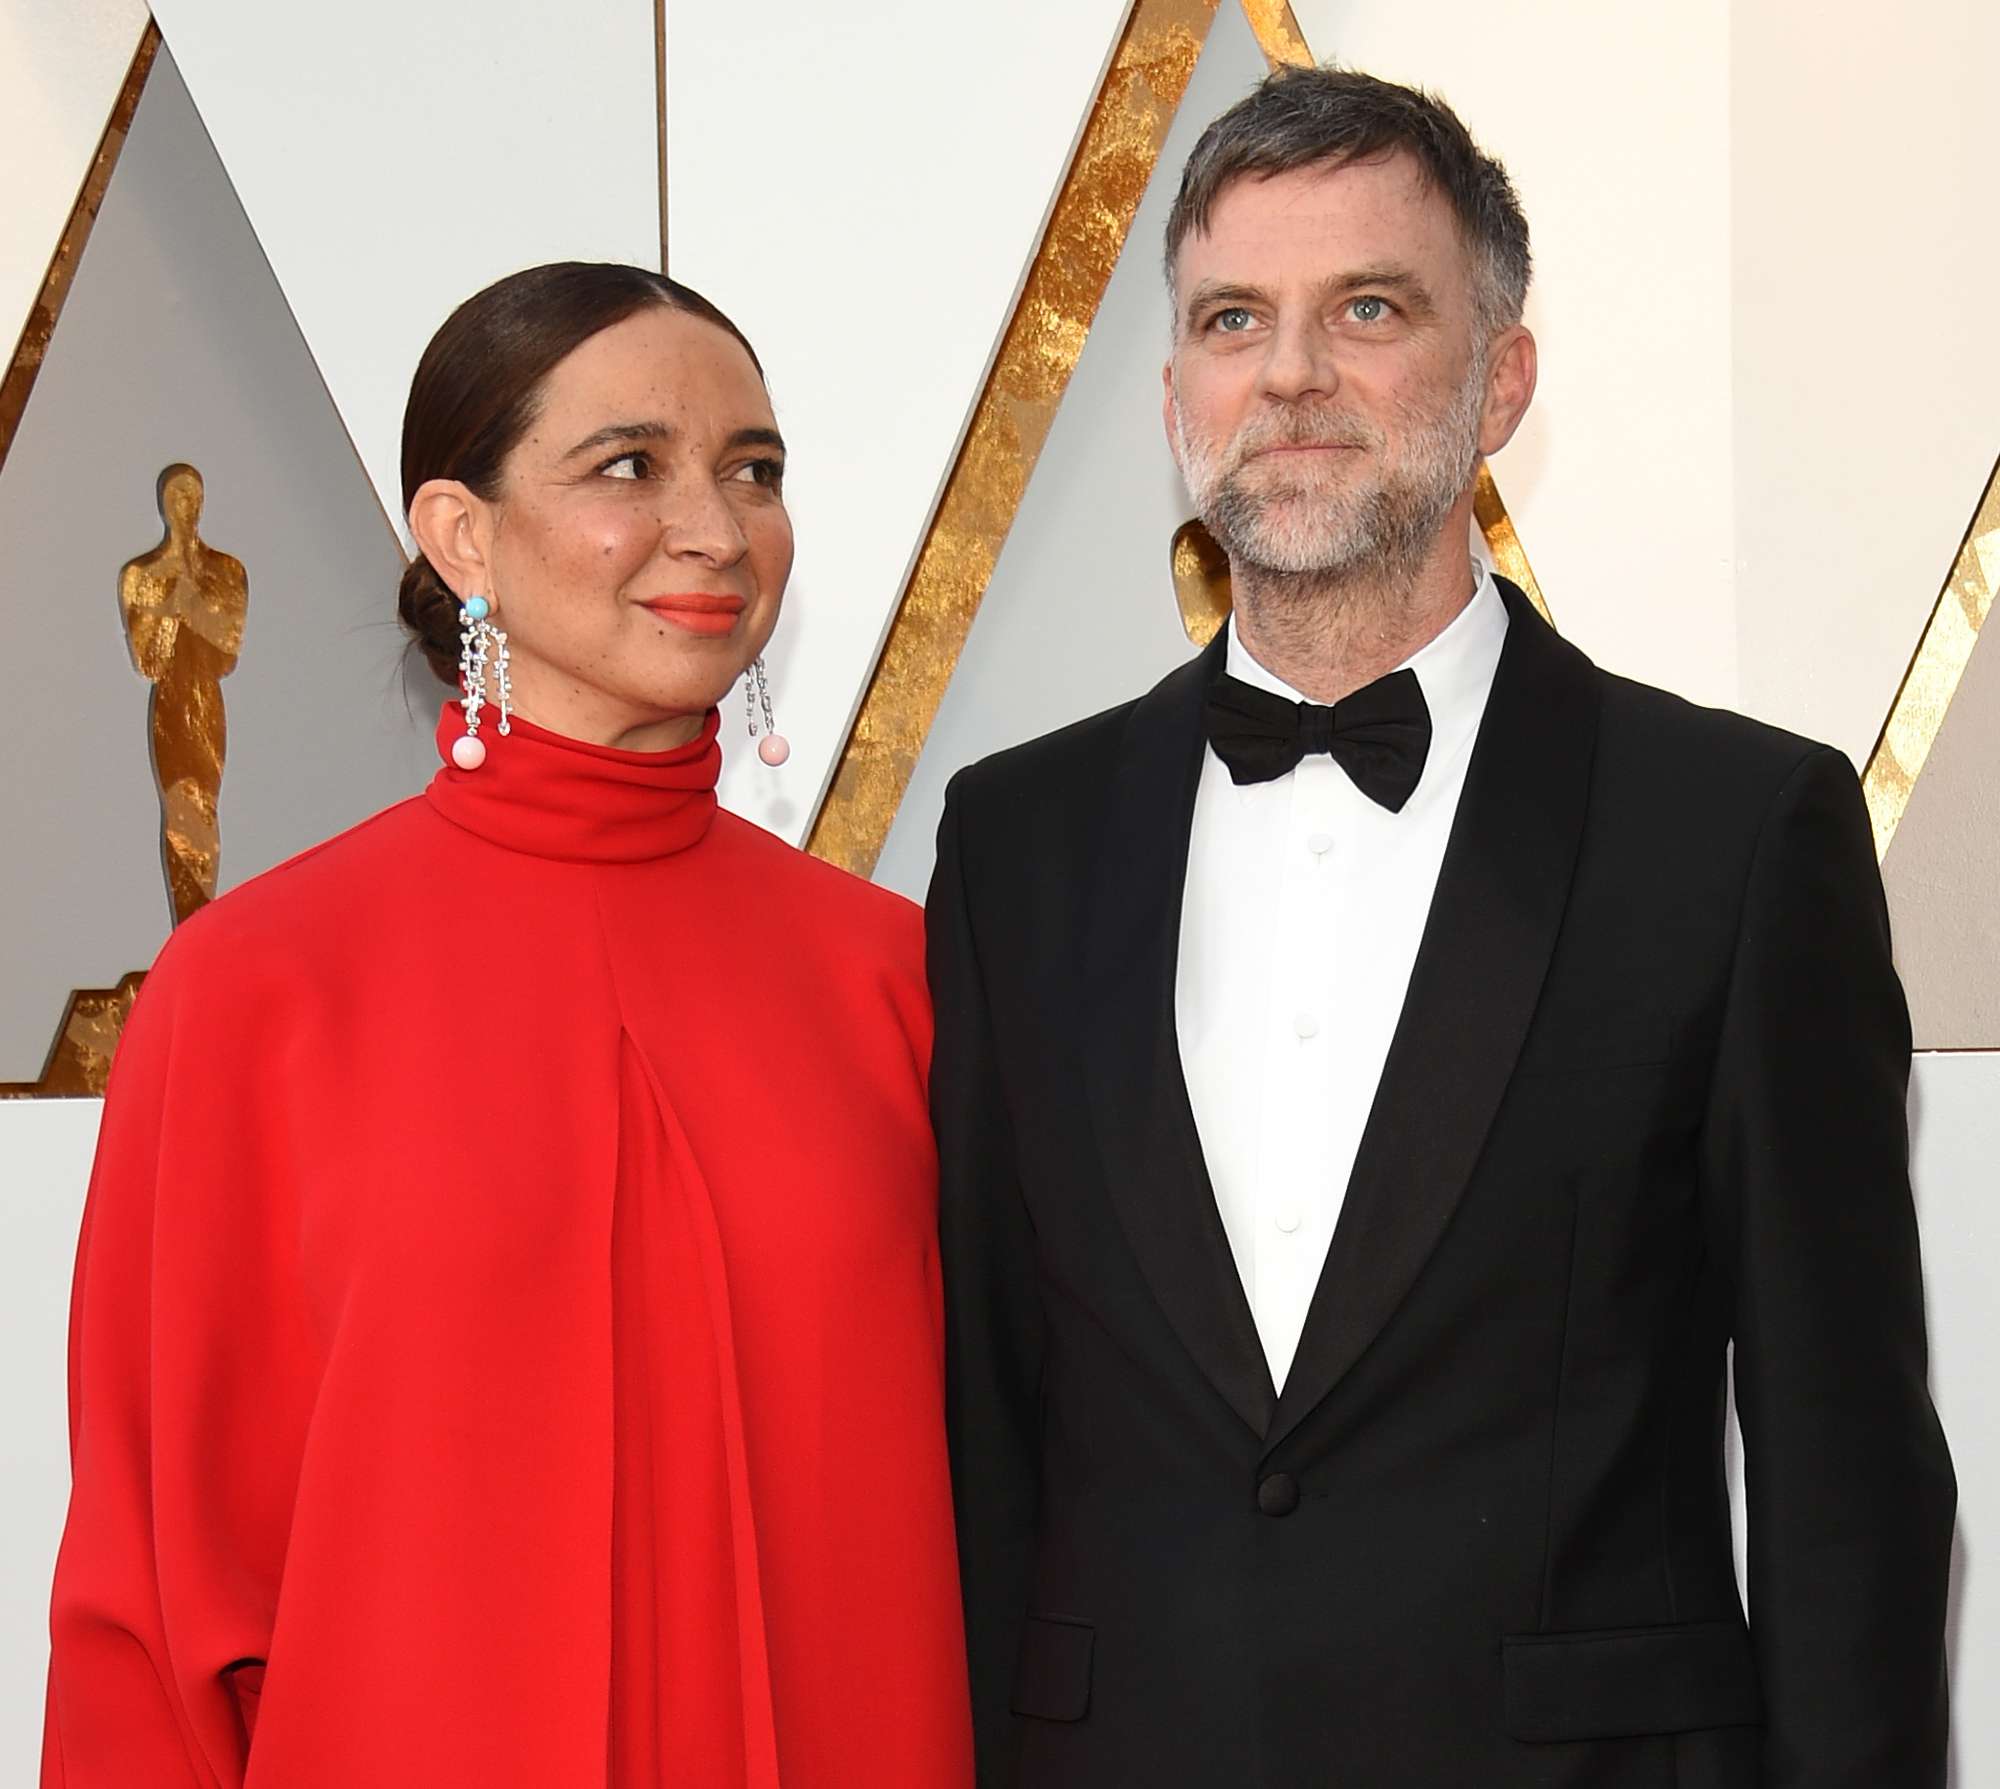 Maya Rudolph and Director Paul Thomas Anderson arrive for the 90th Annual Academy Awards on March 4, 2018, in Hollywood, California